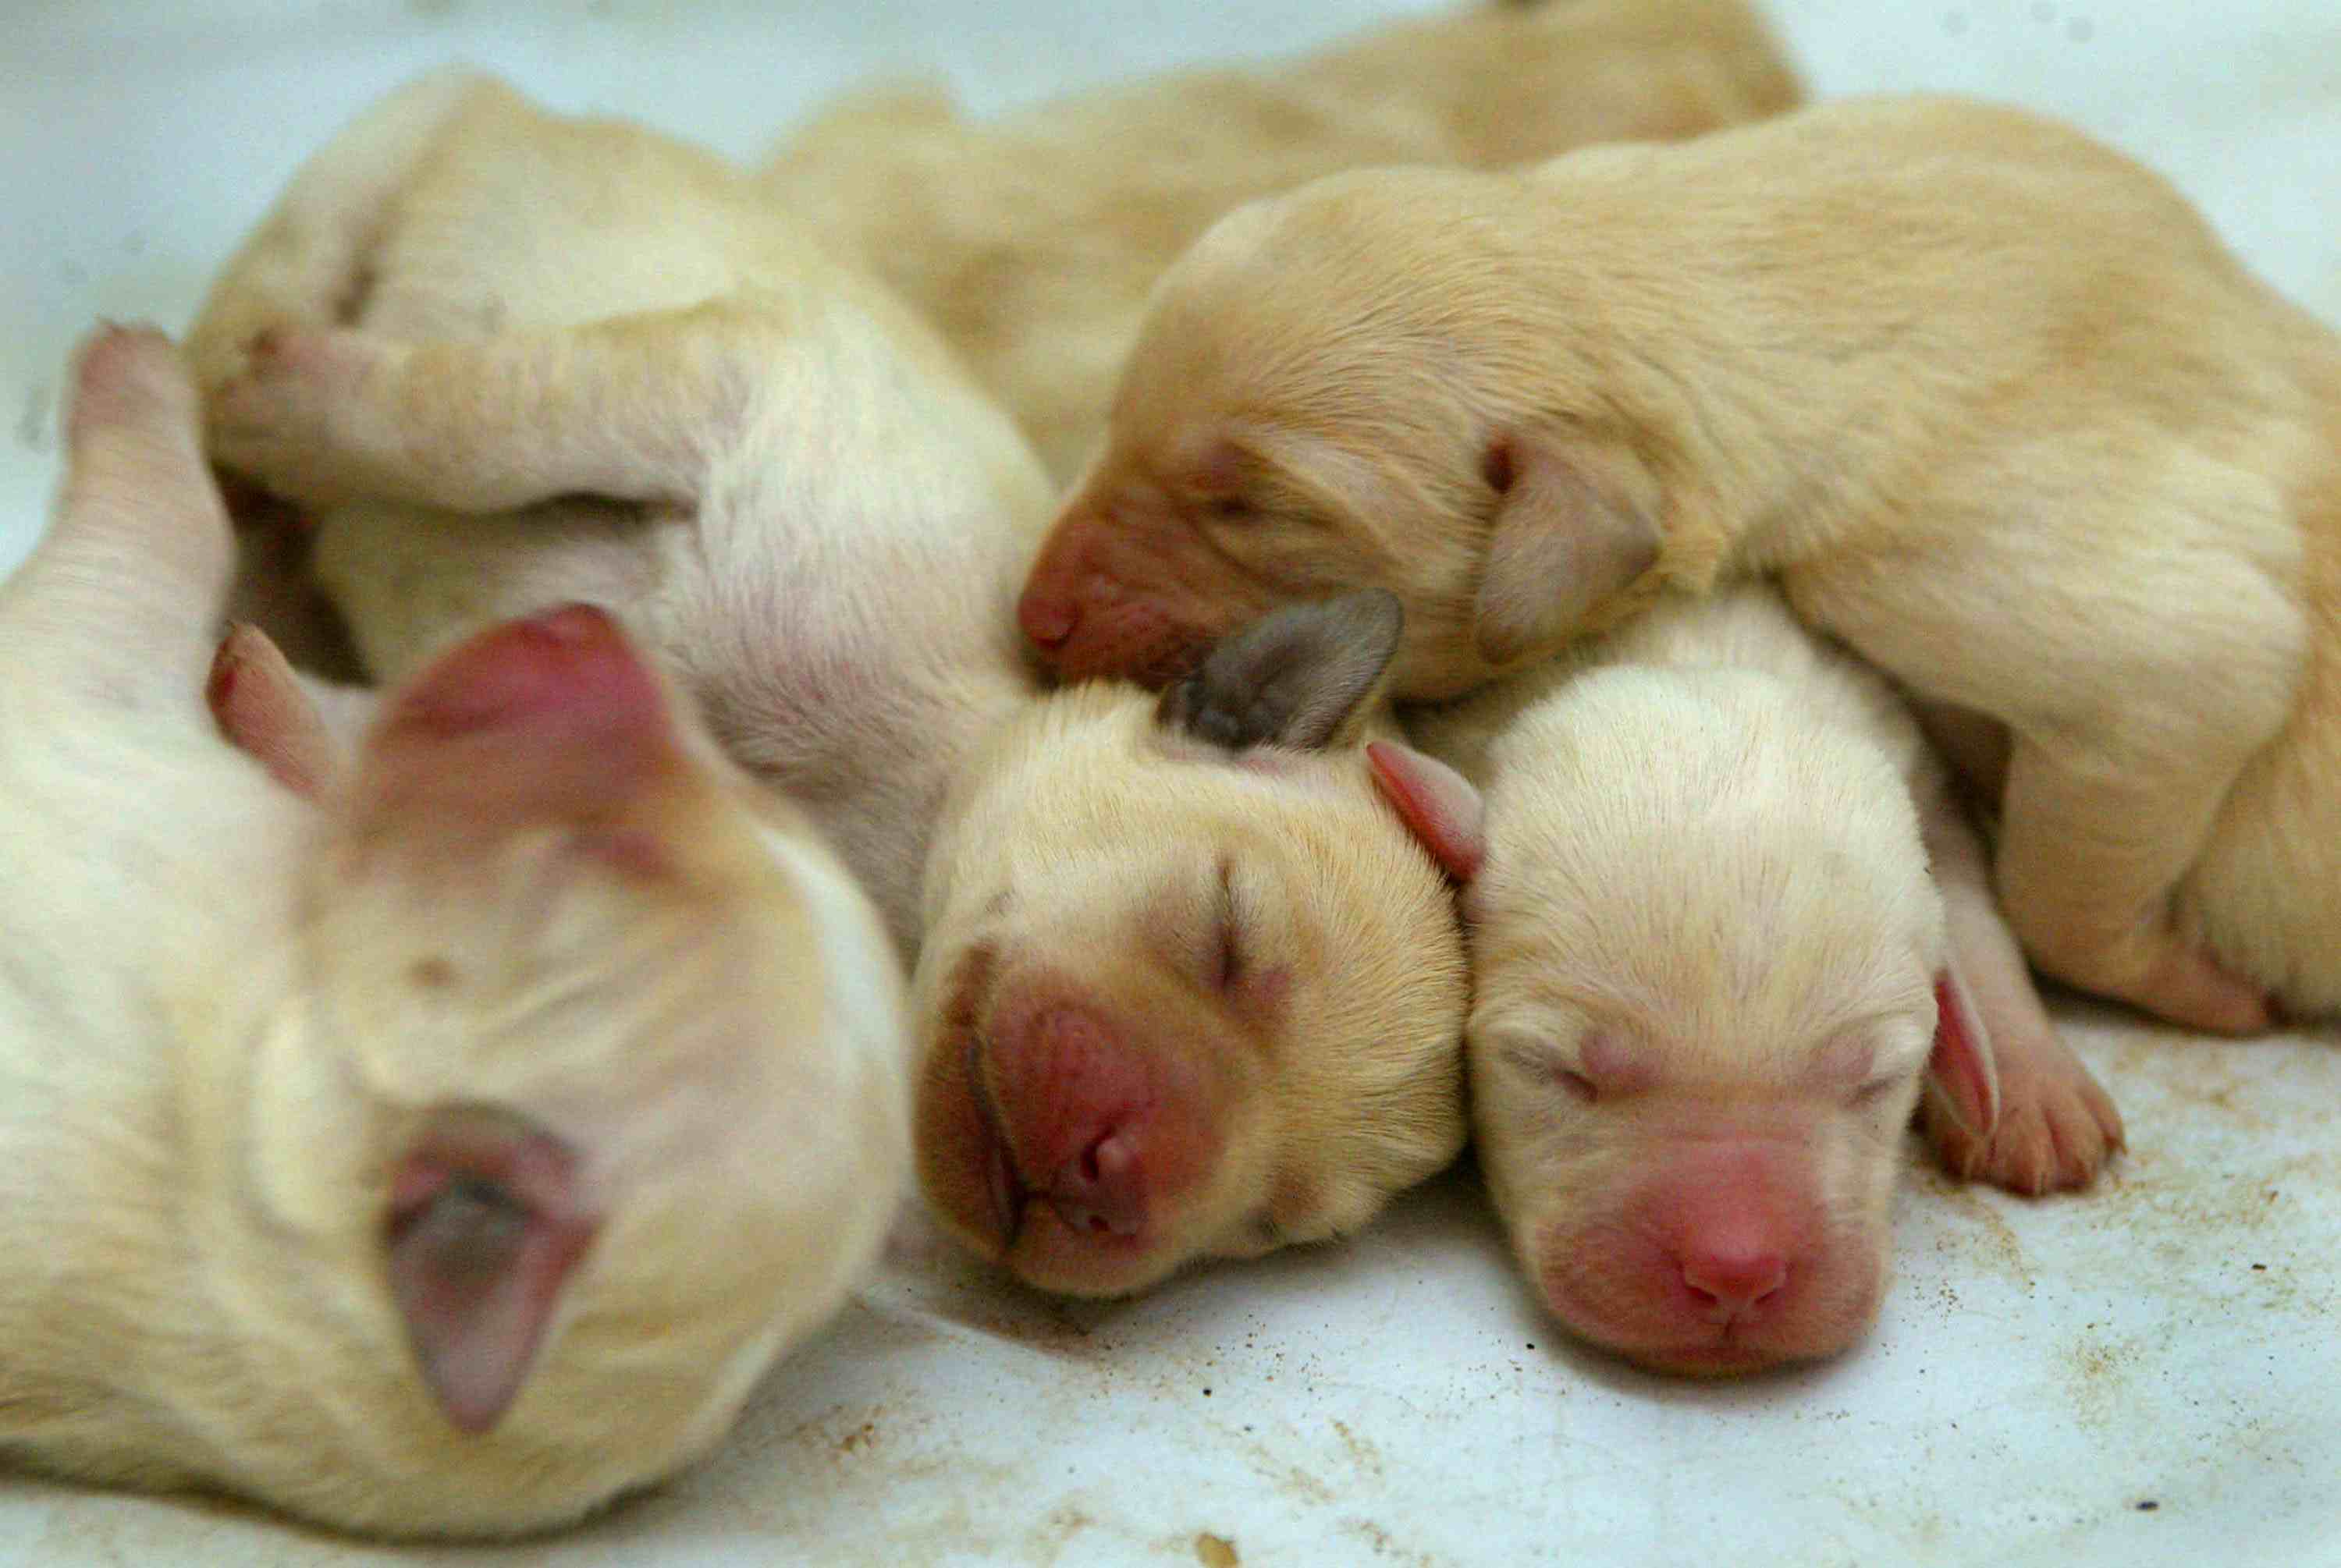 Newborn puppies piled together